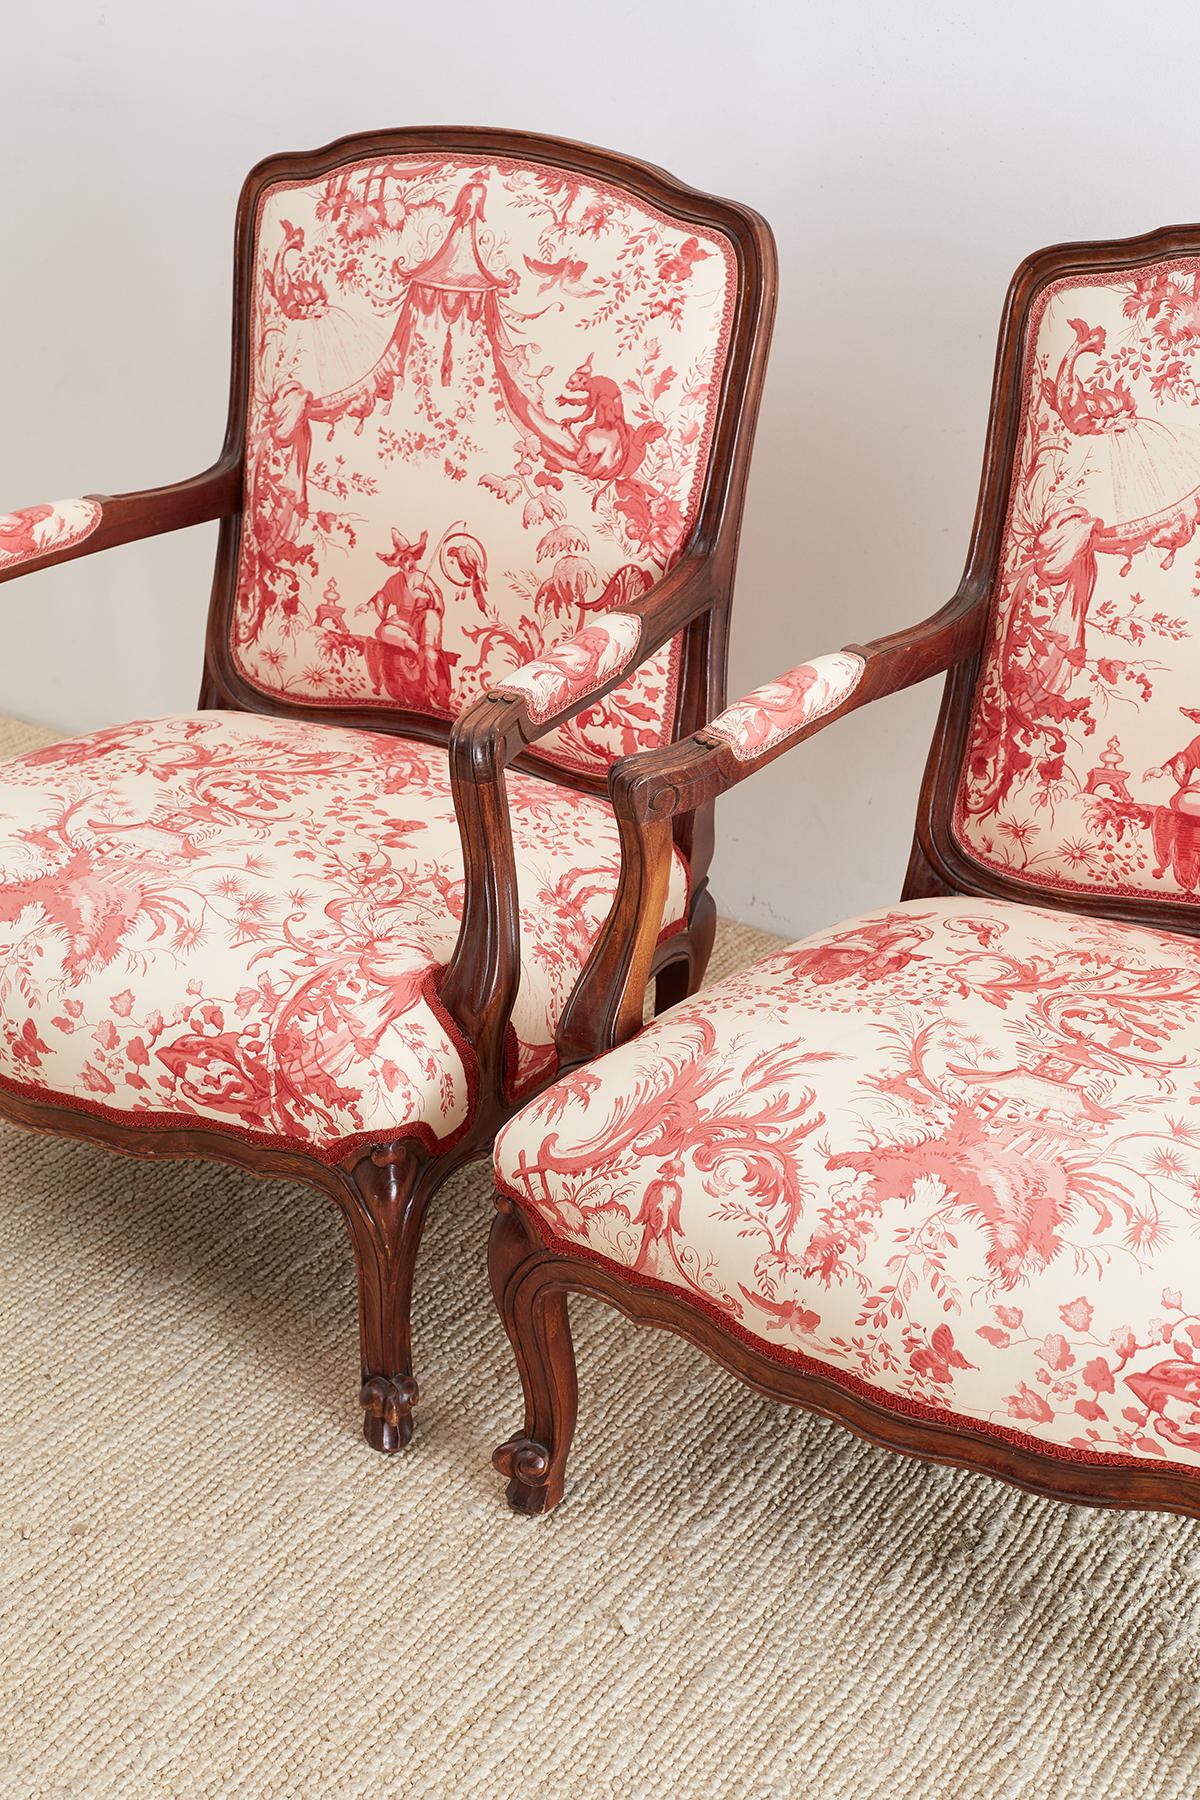 Stunning pair of French Louis XV style fauteuils or armchairs featuring Scalamandre petite chinoiserie fabric in red and cream. These 20th century armchairs were produced in Hickory, North Carolina and were made on a large-scale with generous